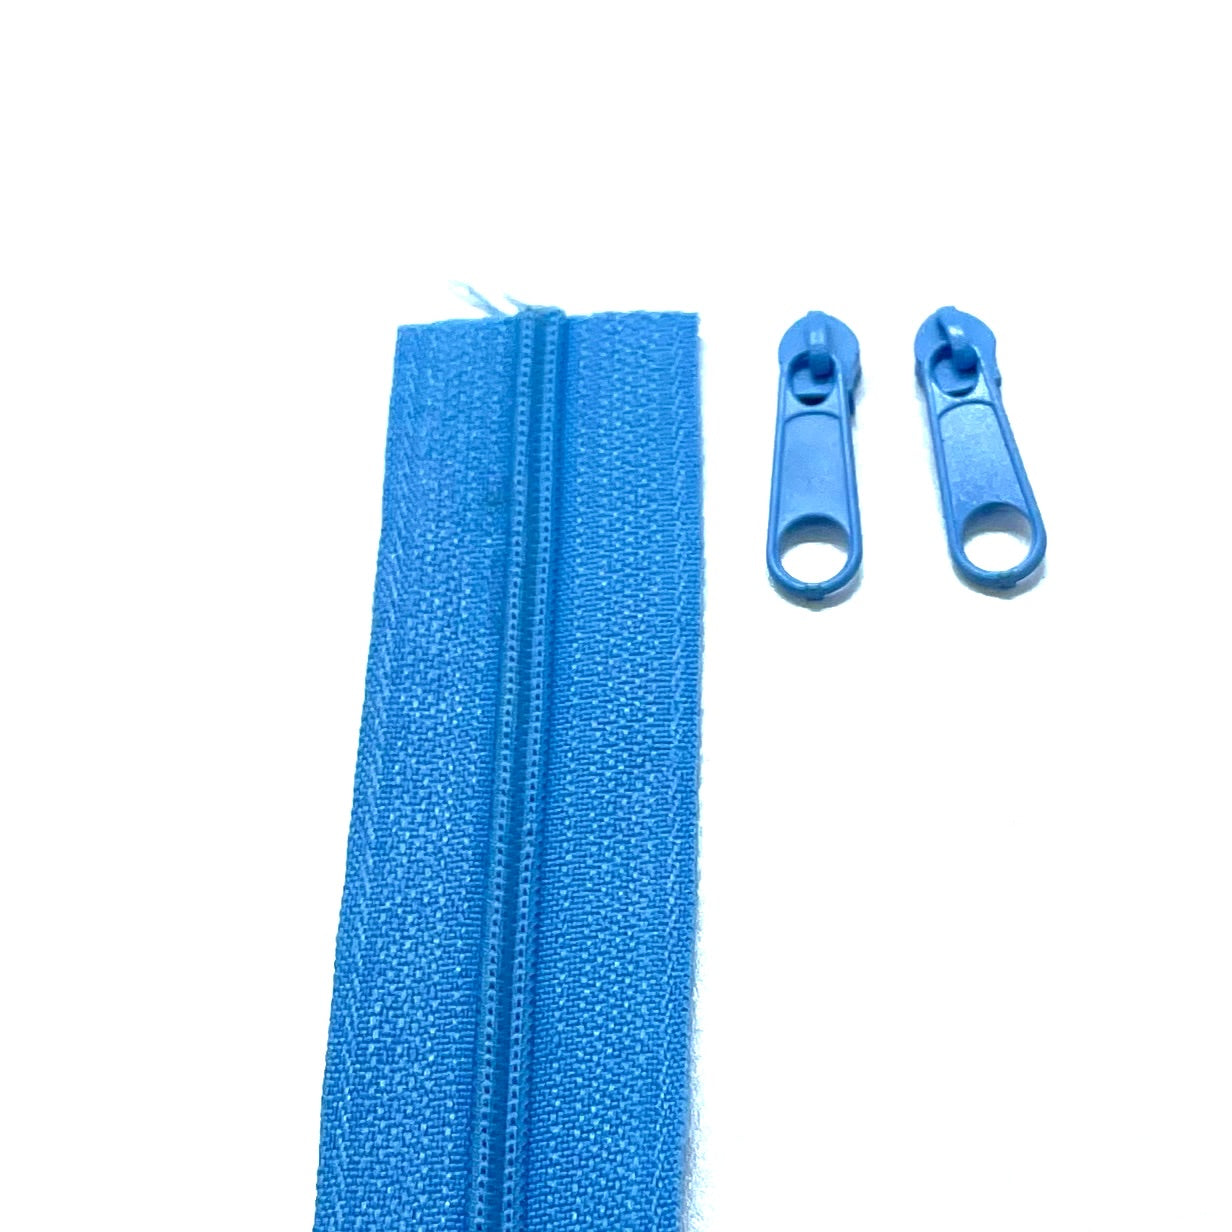 water bluecontinuous long chain zipper tape and sliders